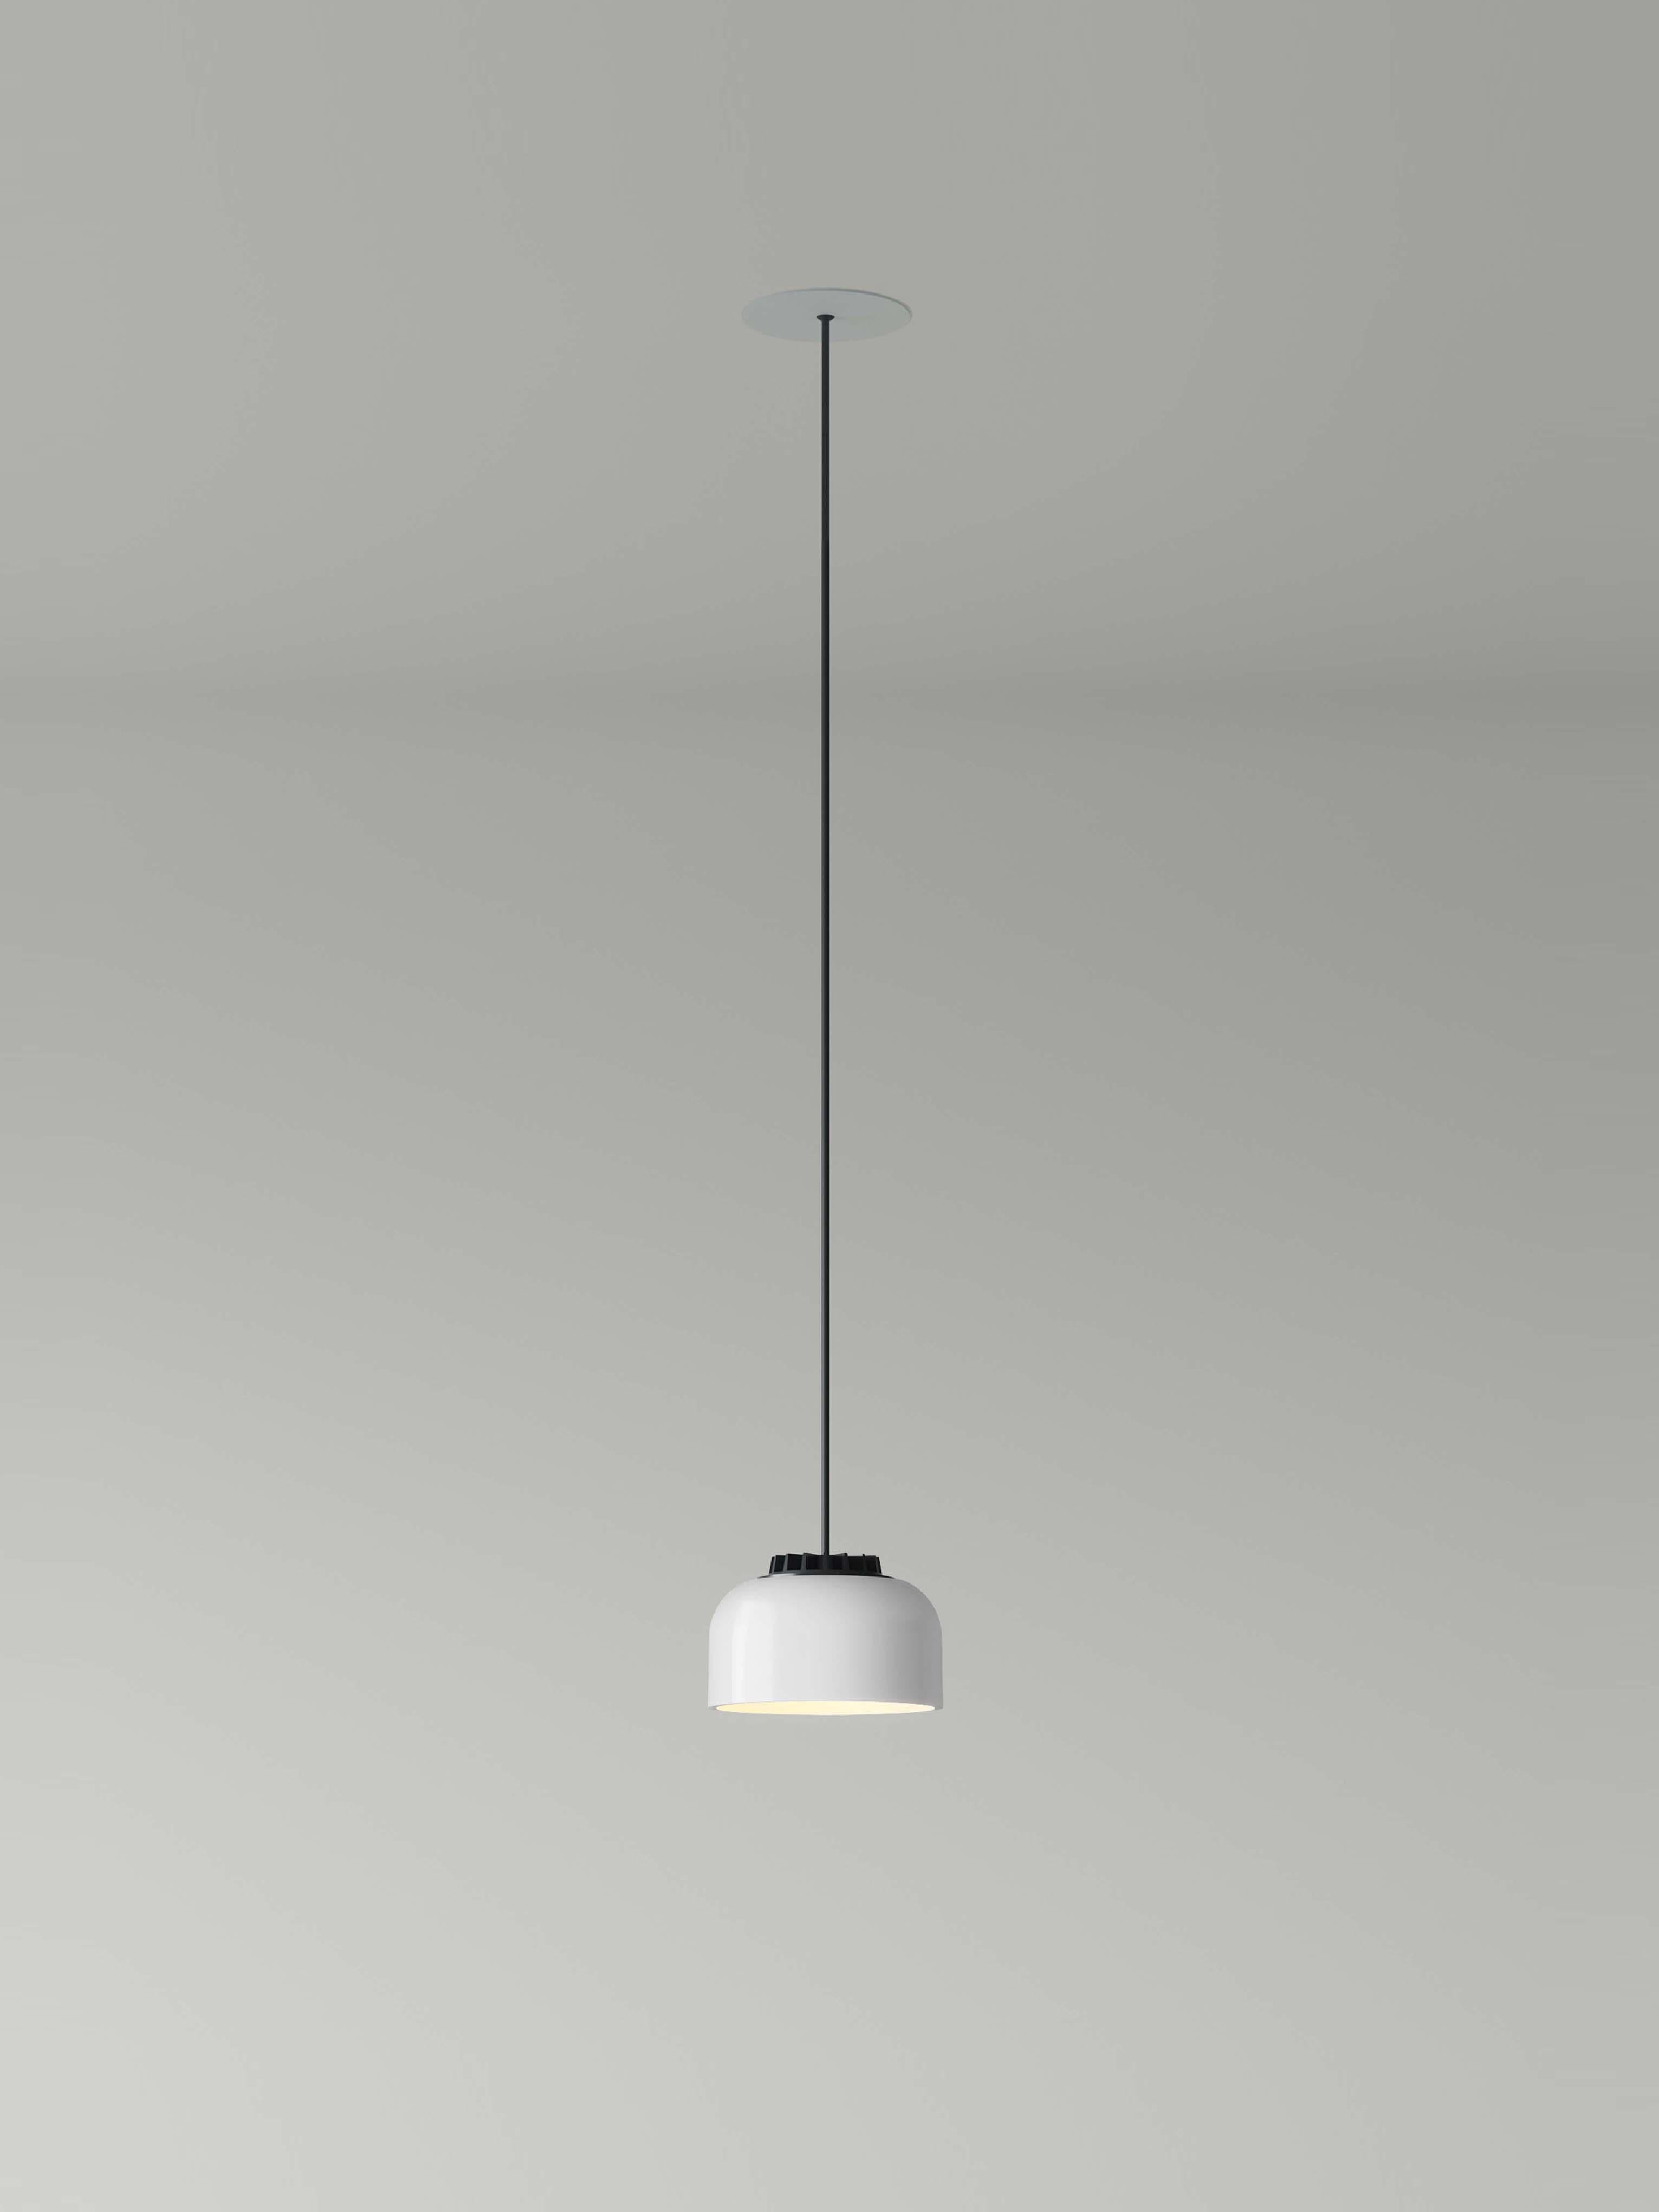 Small white headhat bowl pendant lamp by Santa & Cole
Dimensions: D 14 x H 9 cm
Materials: Metal, ceramic.
Cable lenght: 3mts.
Available in white or black ceramic. Available in 2 cable lengths: 3mts, 8mts.
Availalble in 2 canopy colors: Black